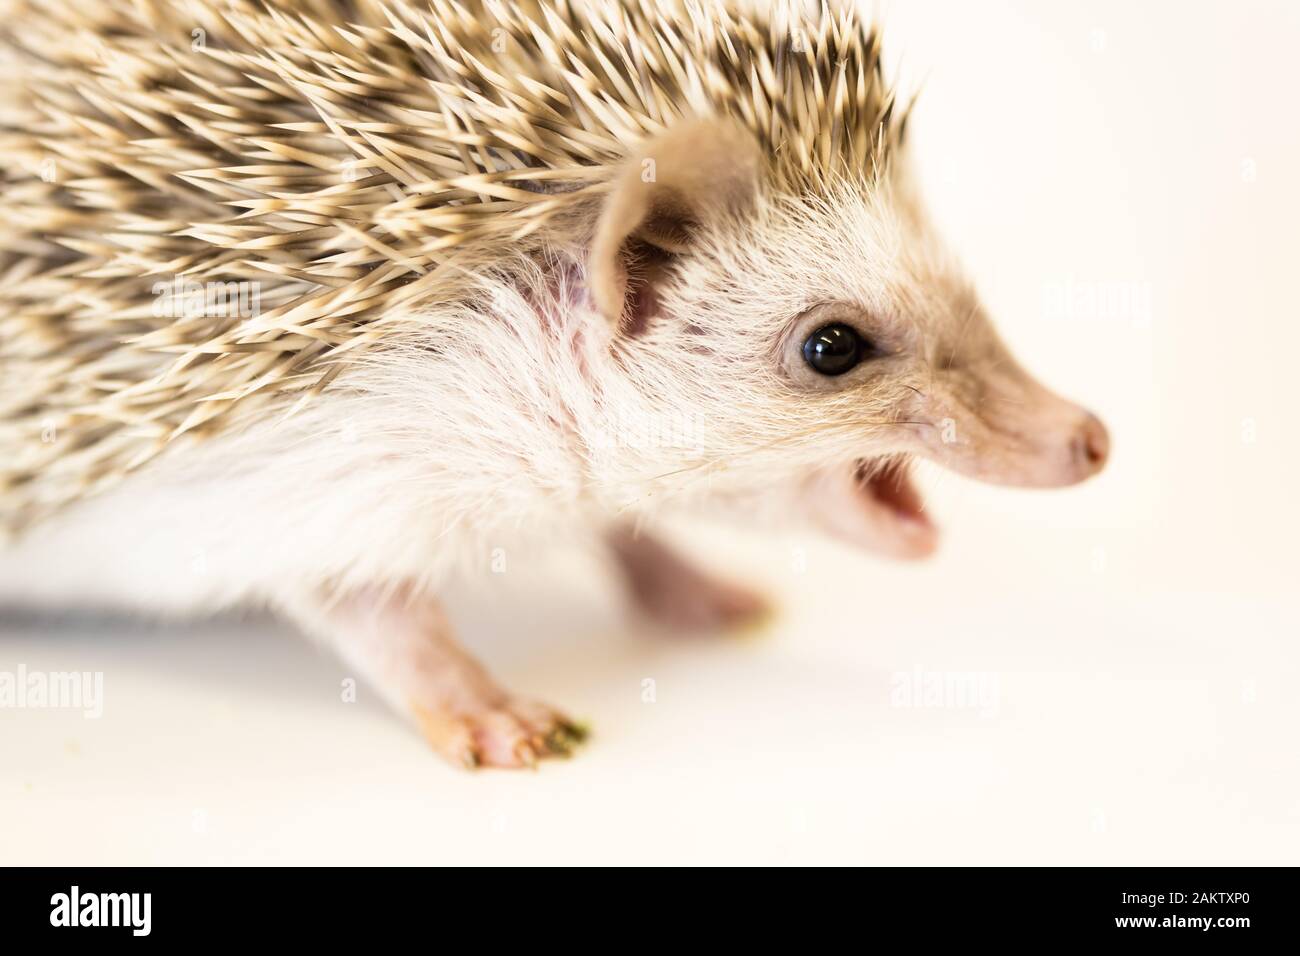 cute baby hedgehog pet on a white table isolated to a white background. Stock Photo